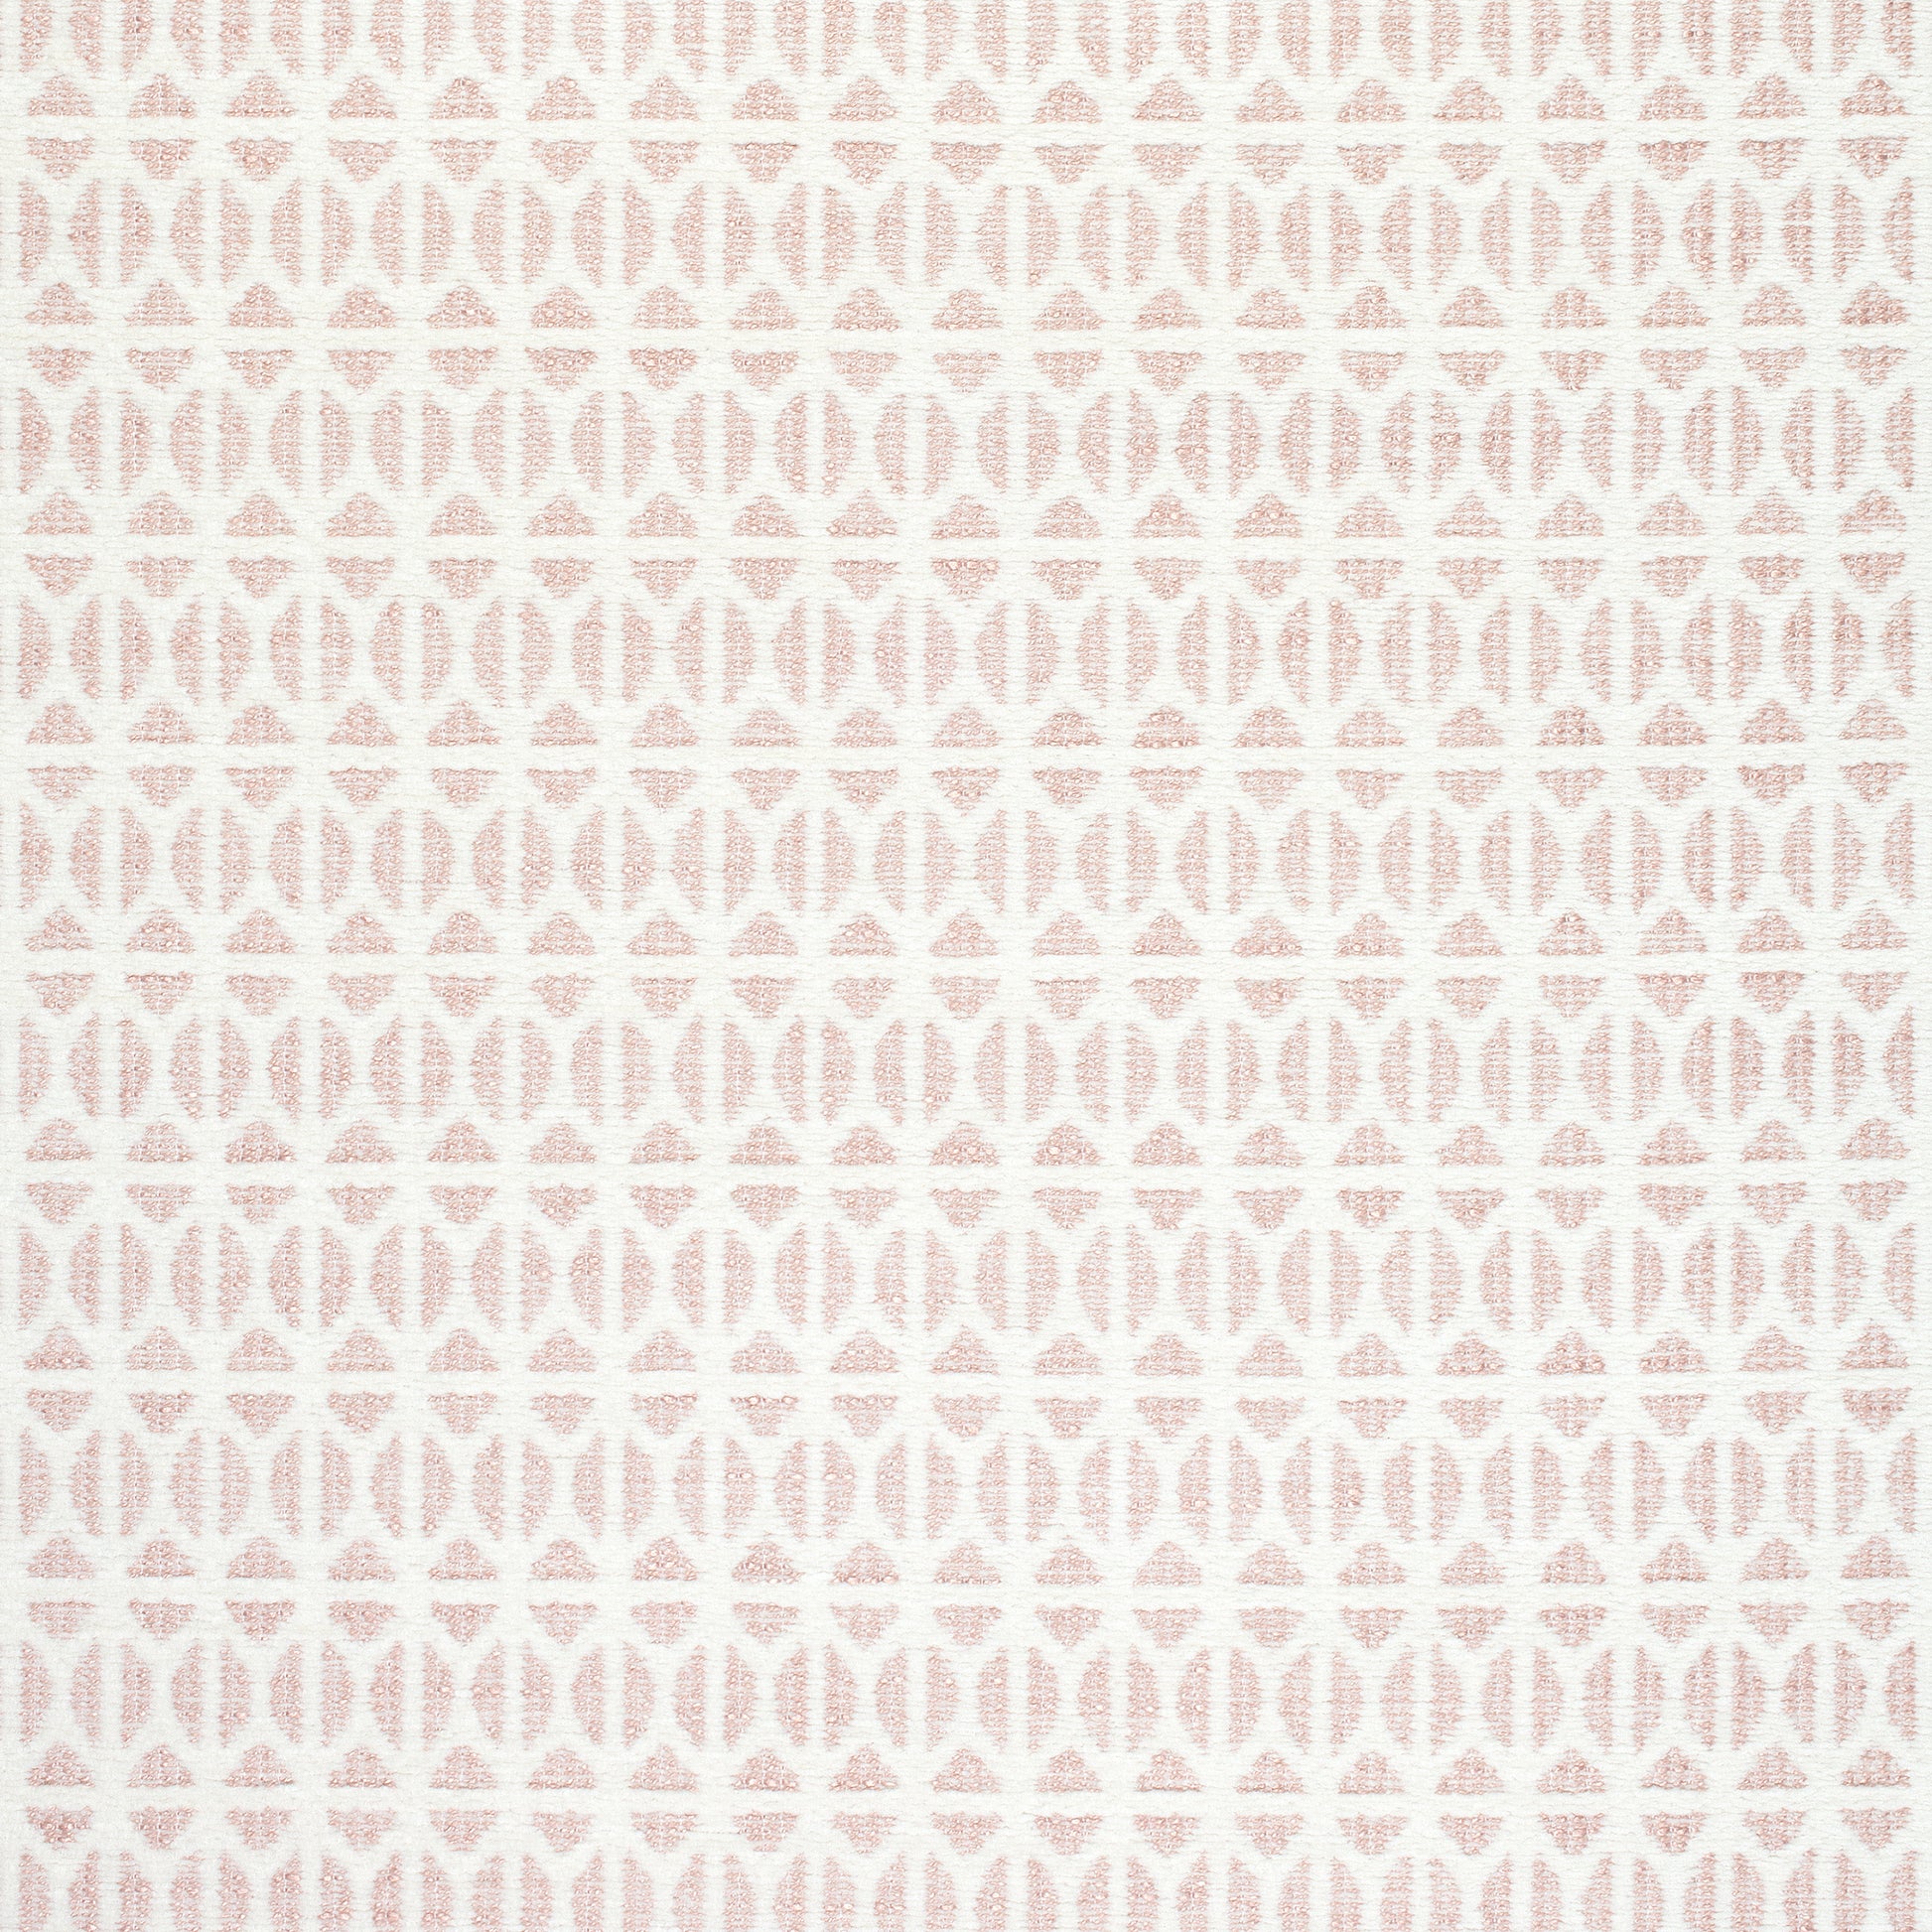 Purchase Thibaut Fabric Item W789106 pattern name Quinlan color Blush